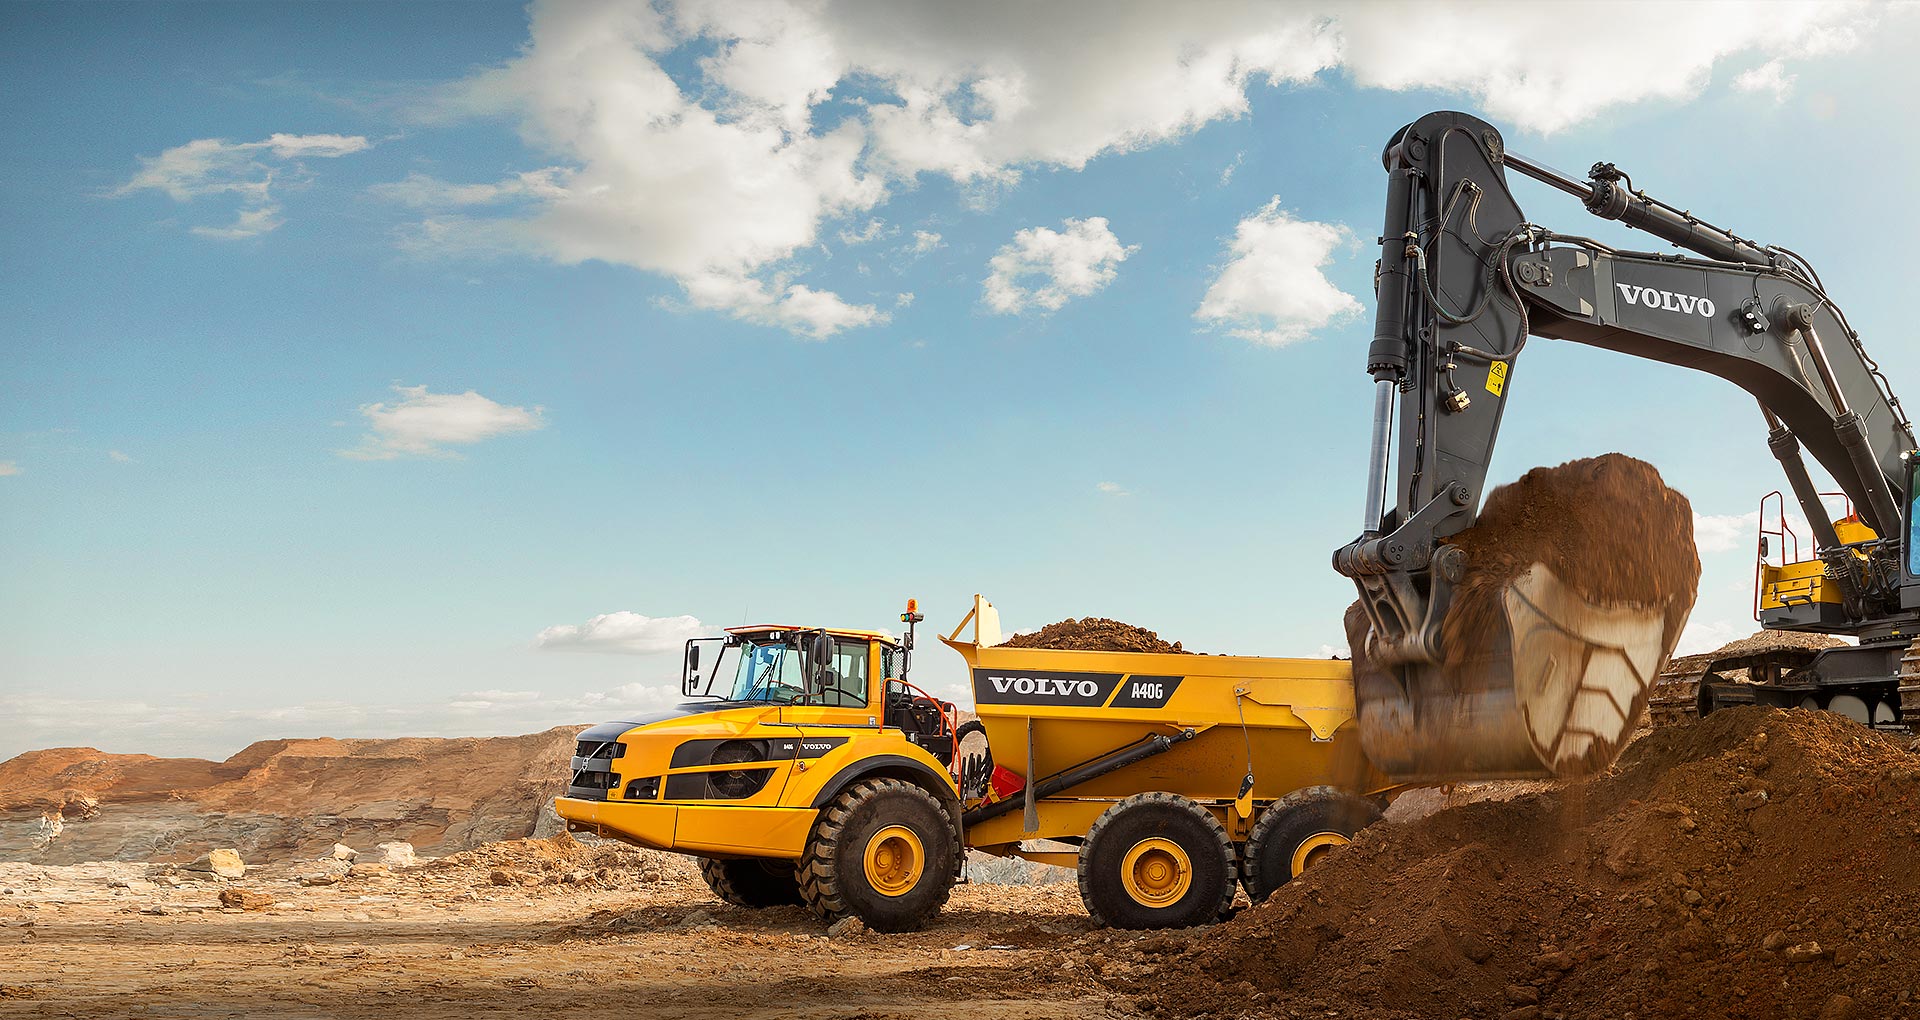 Find out more about our range of construction machinery and accessories.